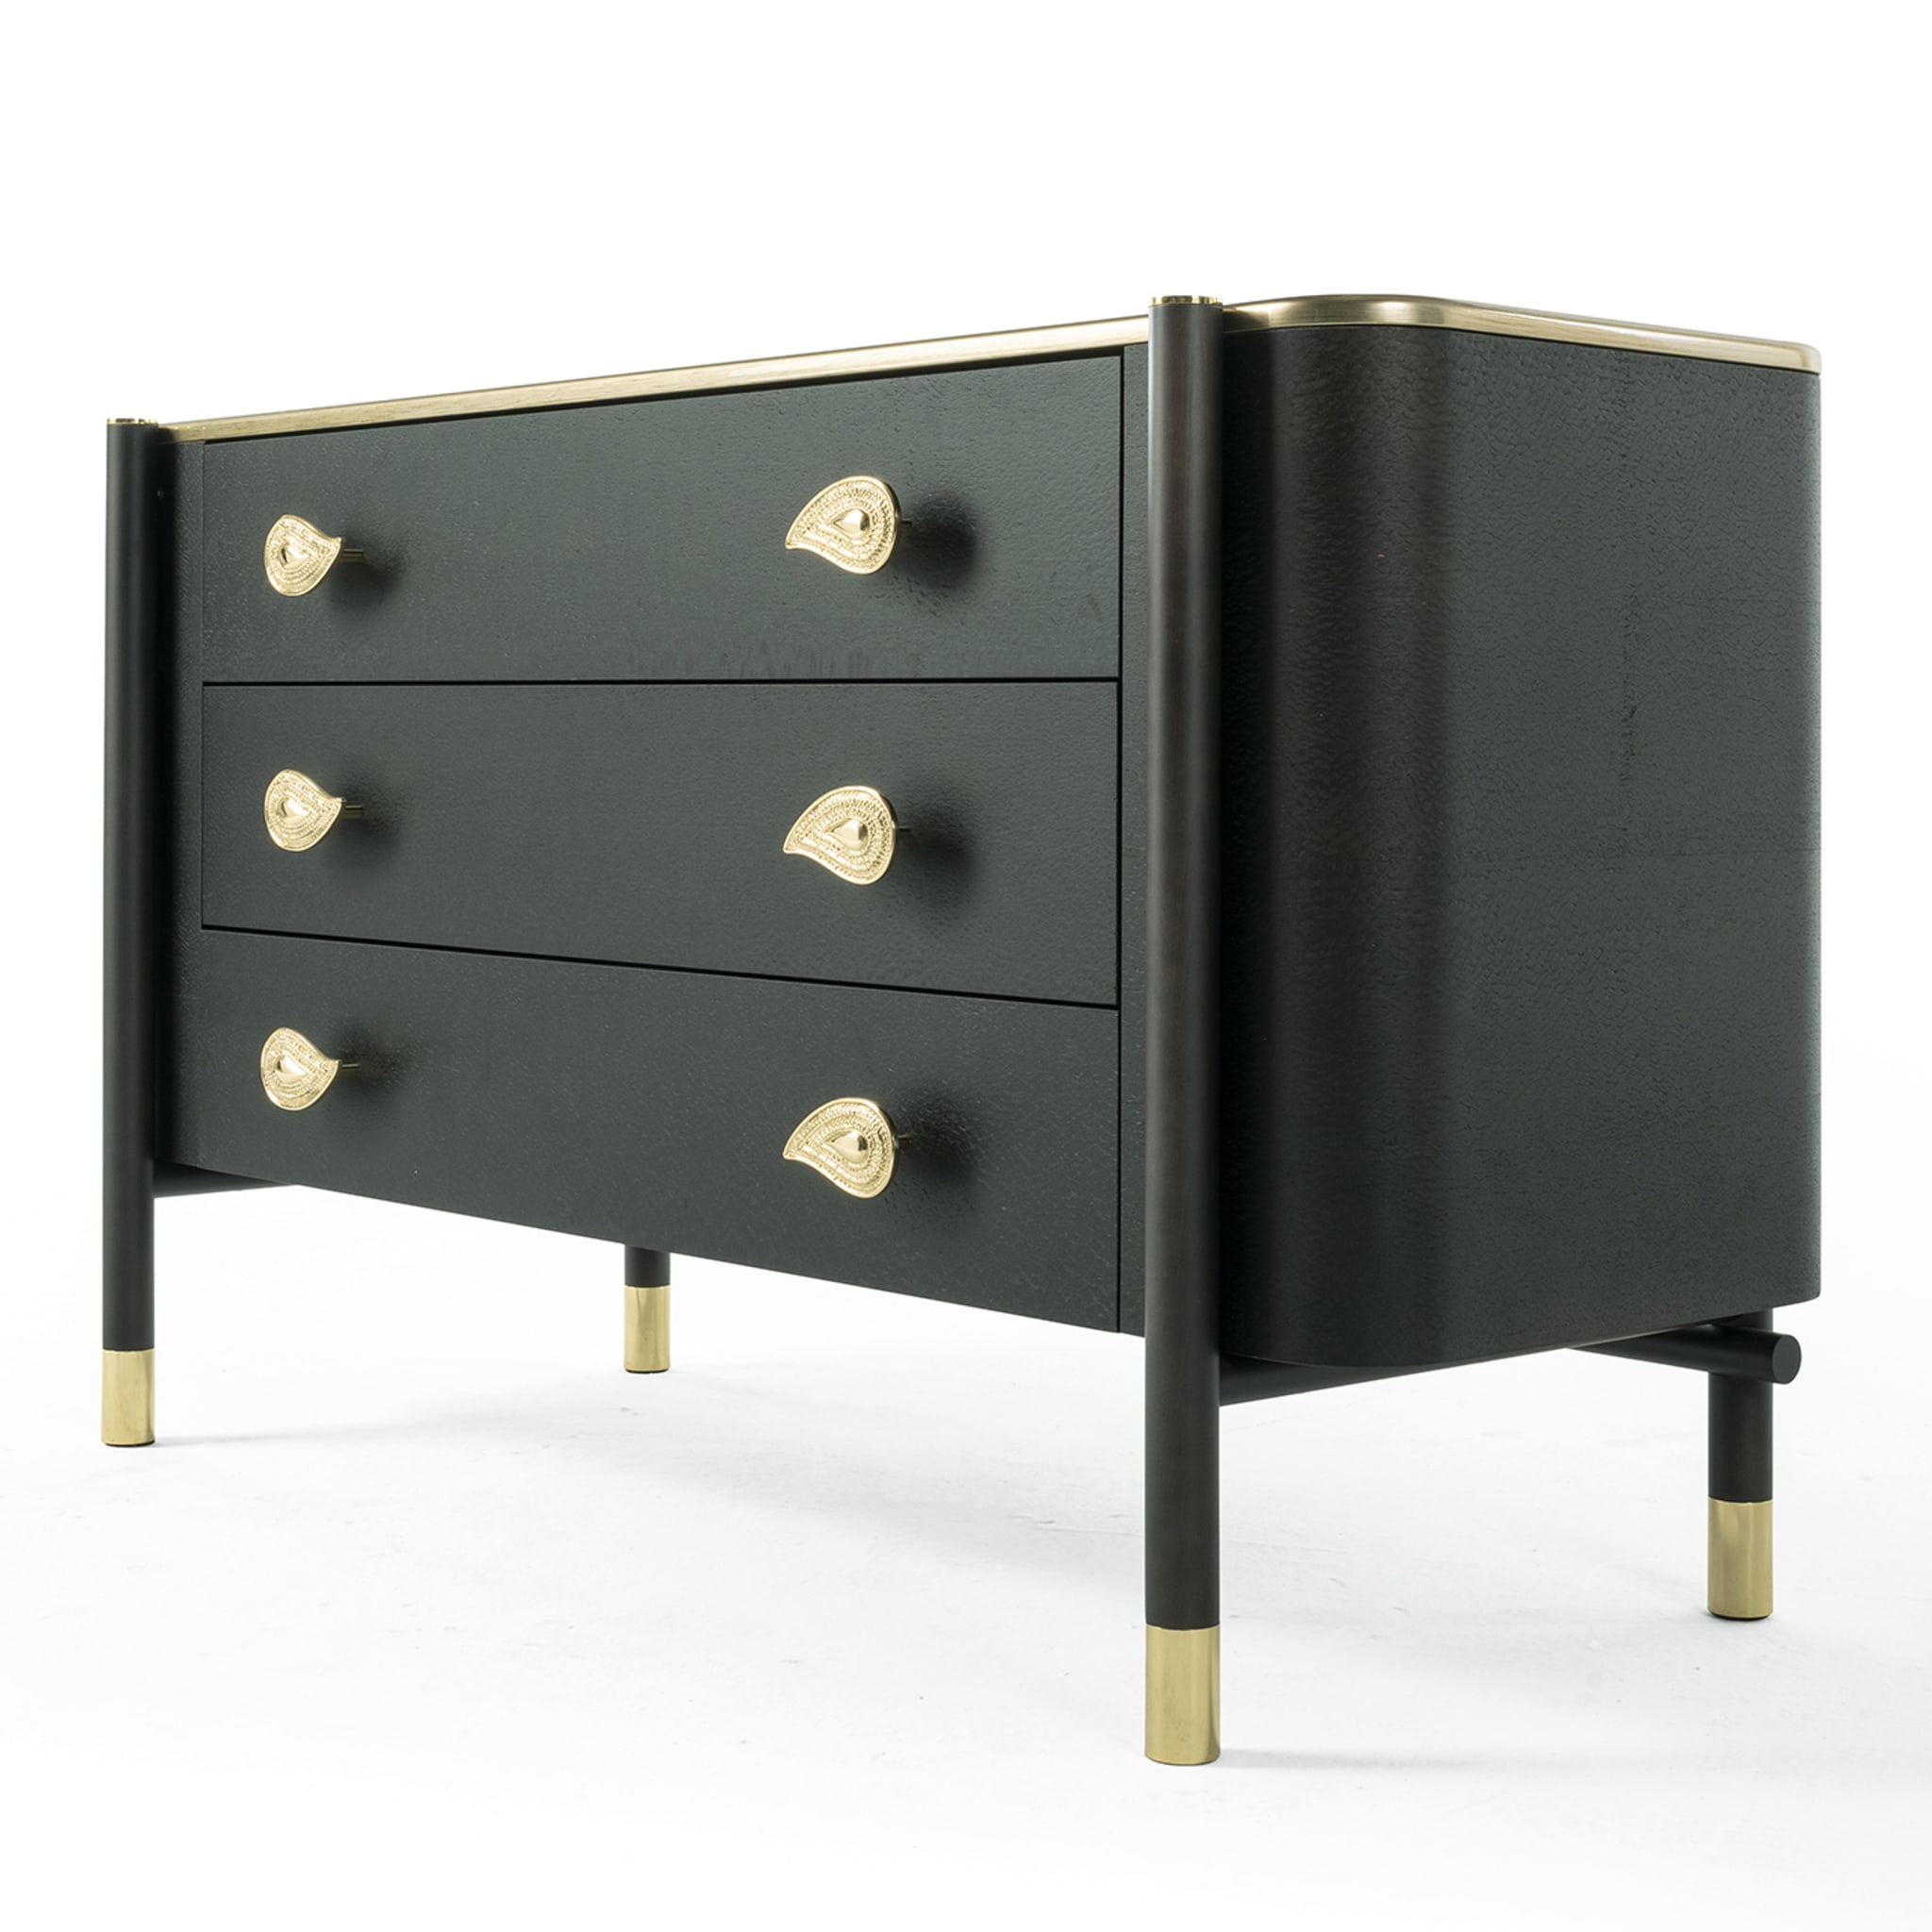 Woodstock Chest of Drawers - Alternative view 4